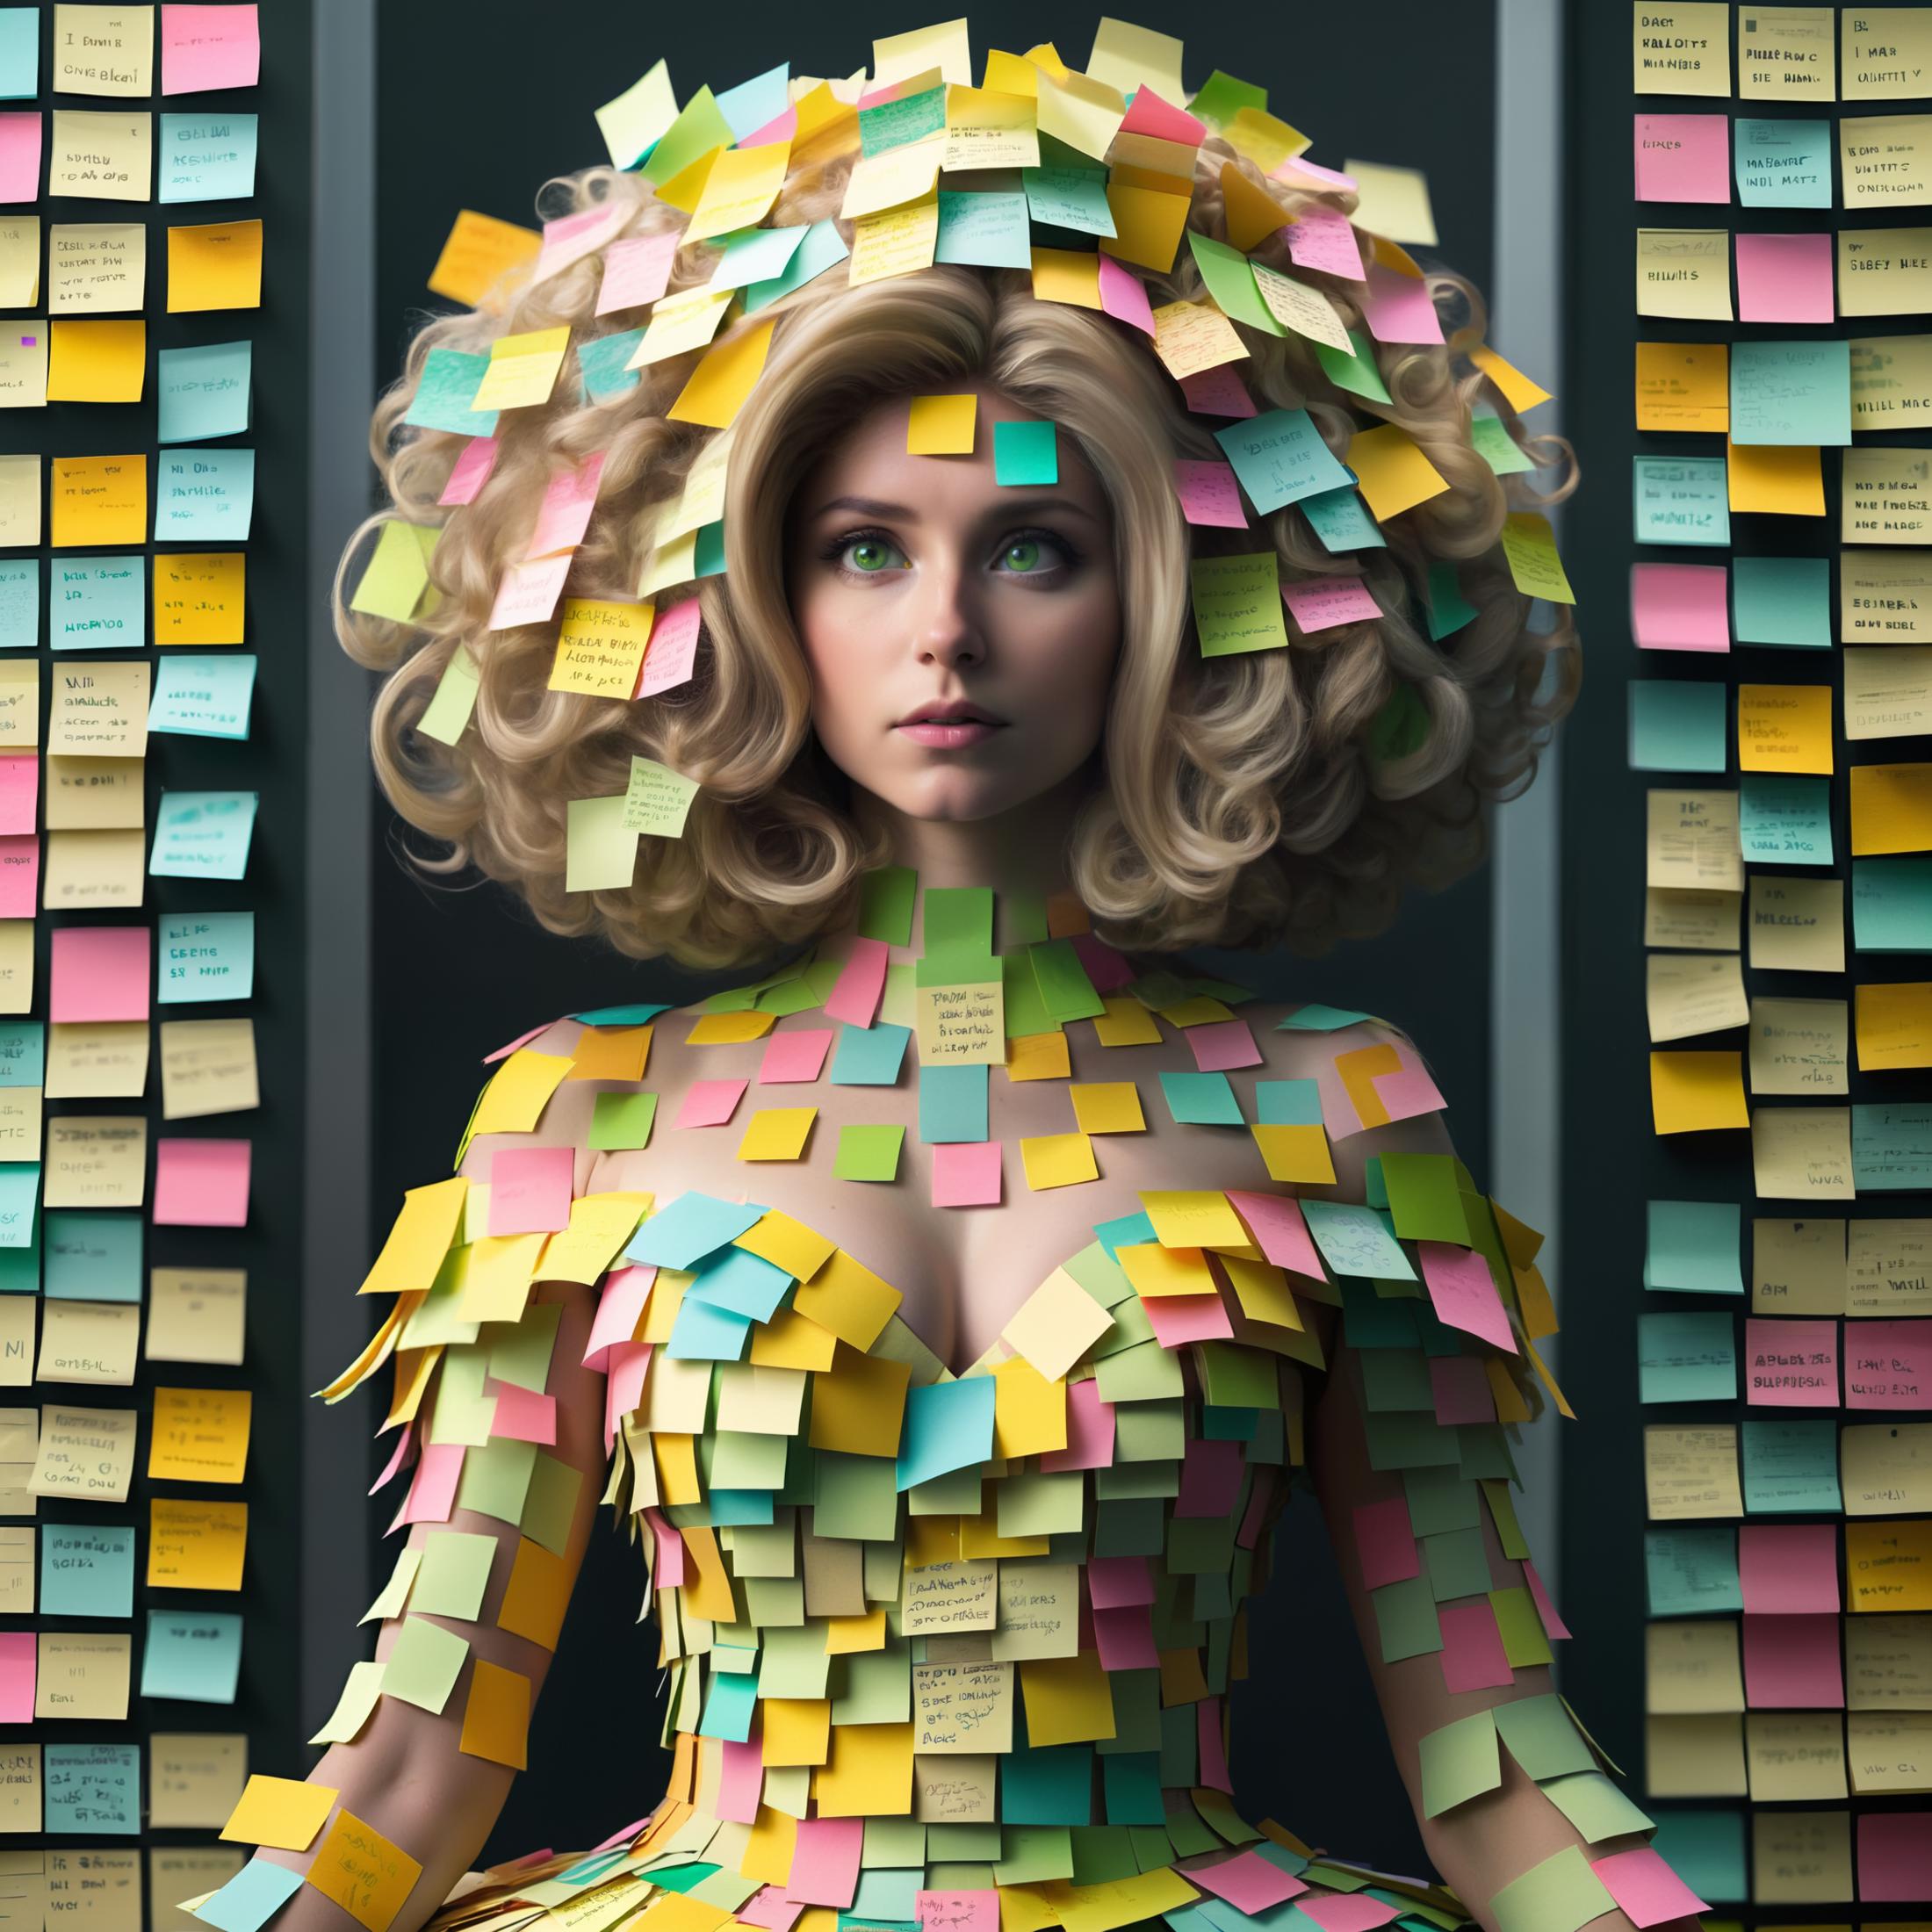 A woman wearing a dress made of post-it notes.